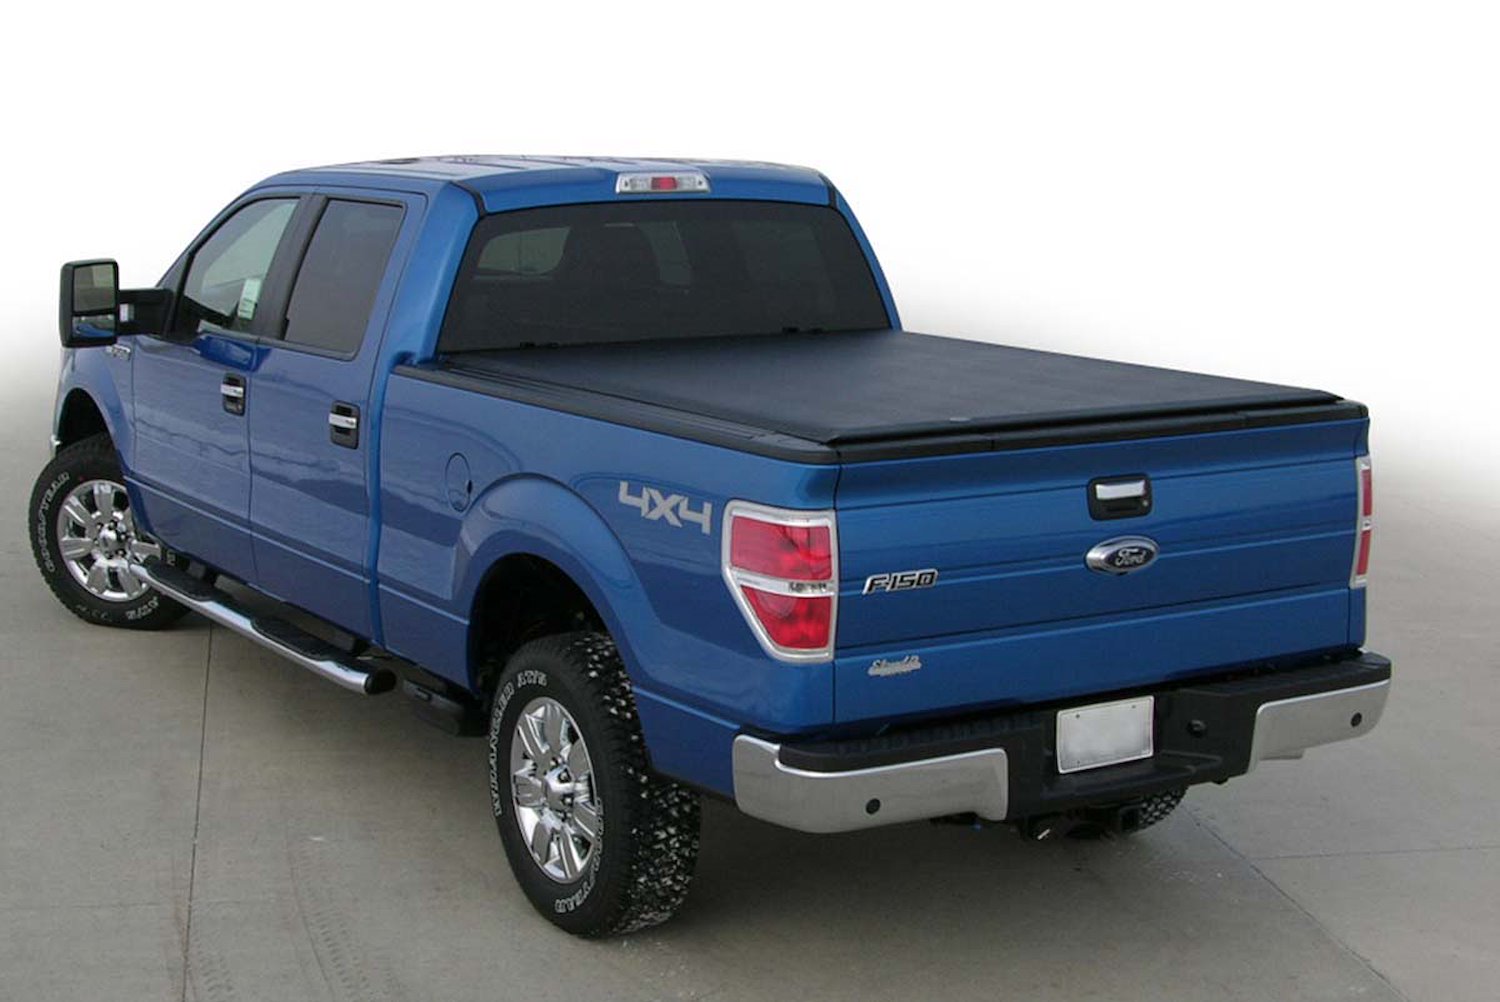 LORADO Roll-Up Tonneau Cover, Fits Select Toyota Tundra, with 8 ft. 1 in. Bed w/Deck Rail